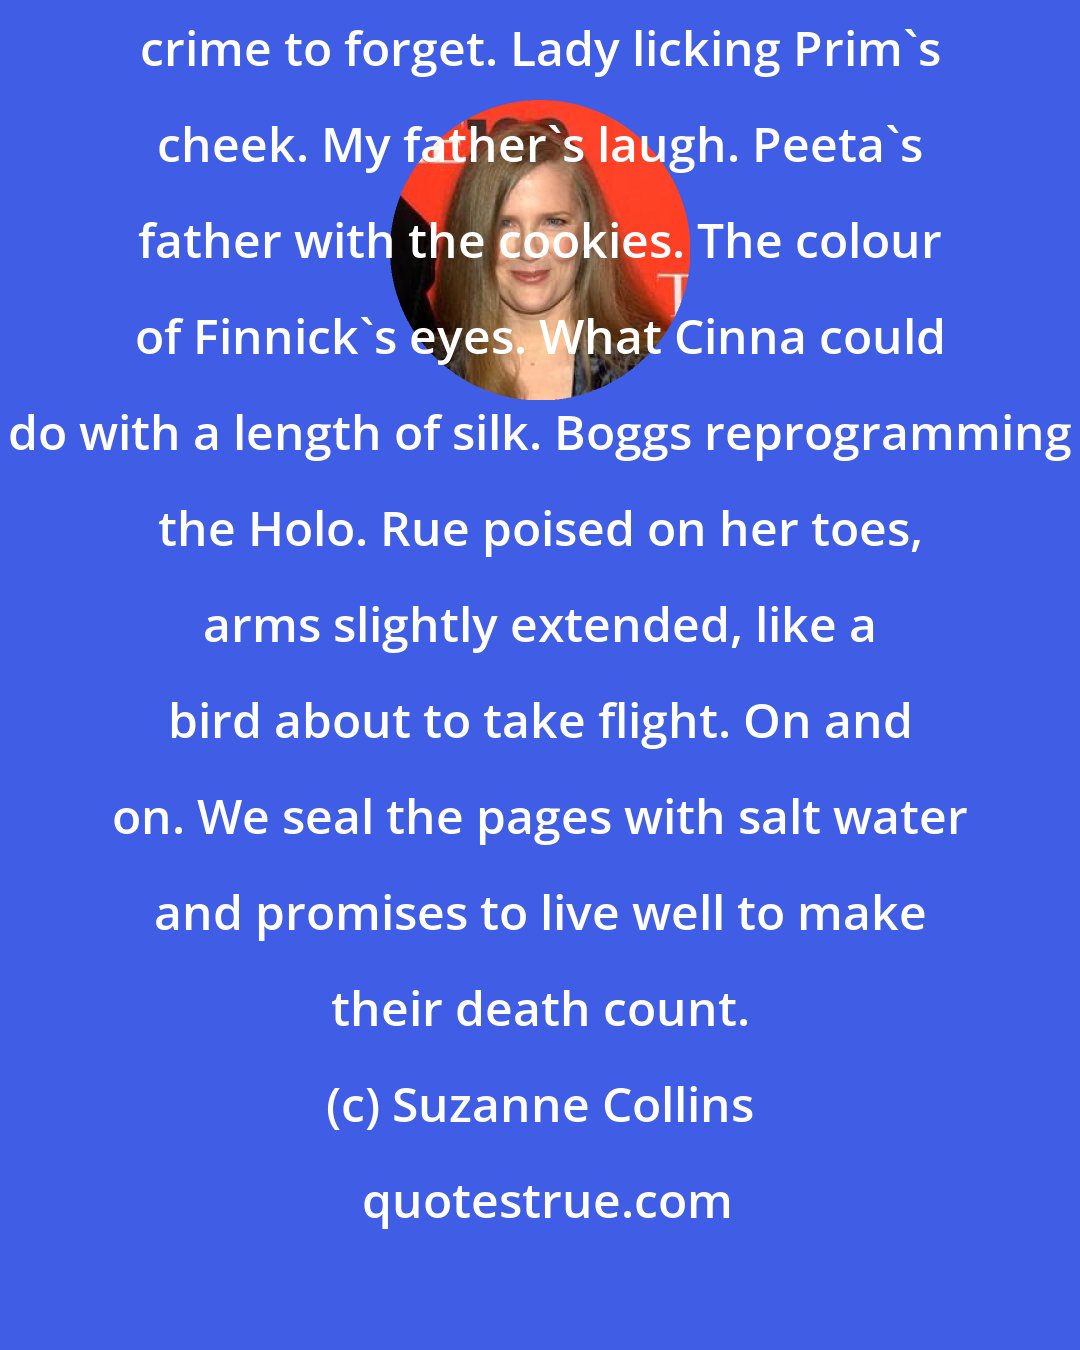 Suzanne Collins: Then, in my most careful handwriting, come all the details it would be a crime to forget. Lady licking Prim's cheek. My father's laugh. Peeta's father with the cookies. The colour of Finnick's eyes. What Cinna could do with a length of silk. Boggs reprogramming the Holo. Rue poised on her toes, arms slightly extended, like a bird about to take flight. On and on. We seal the pages with salt water and promises to live well to make their death count.